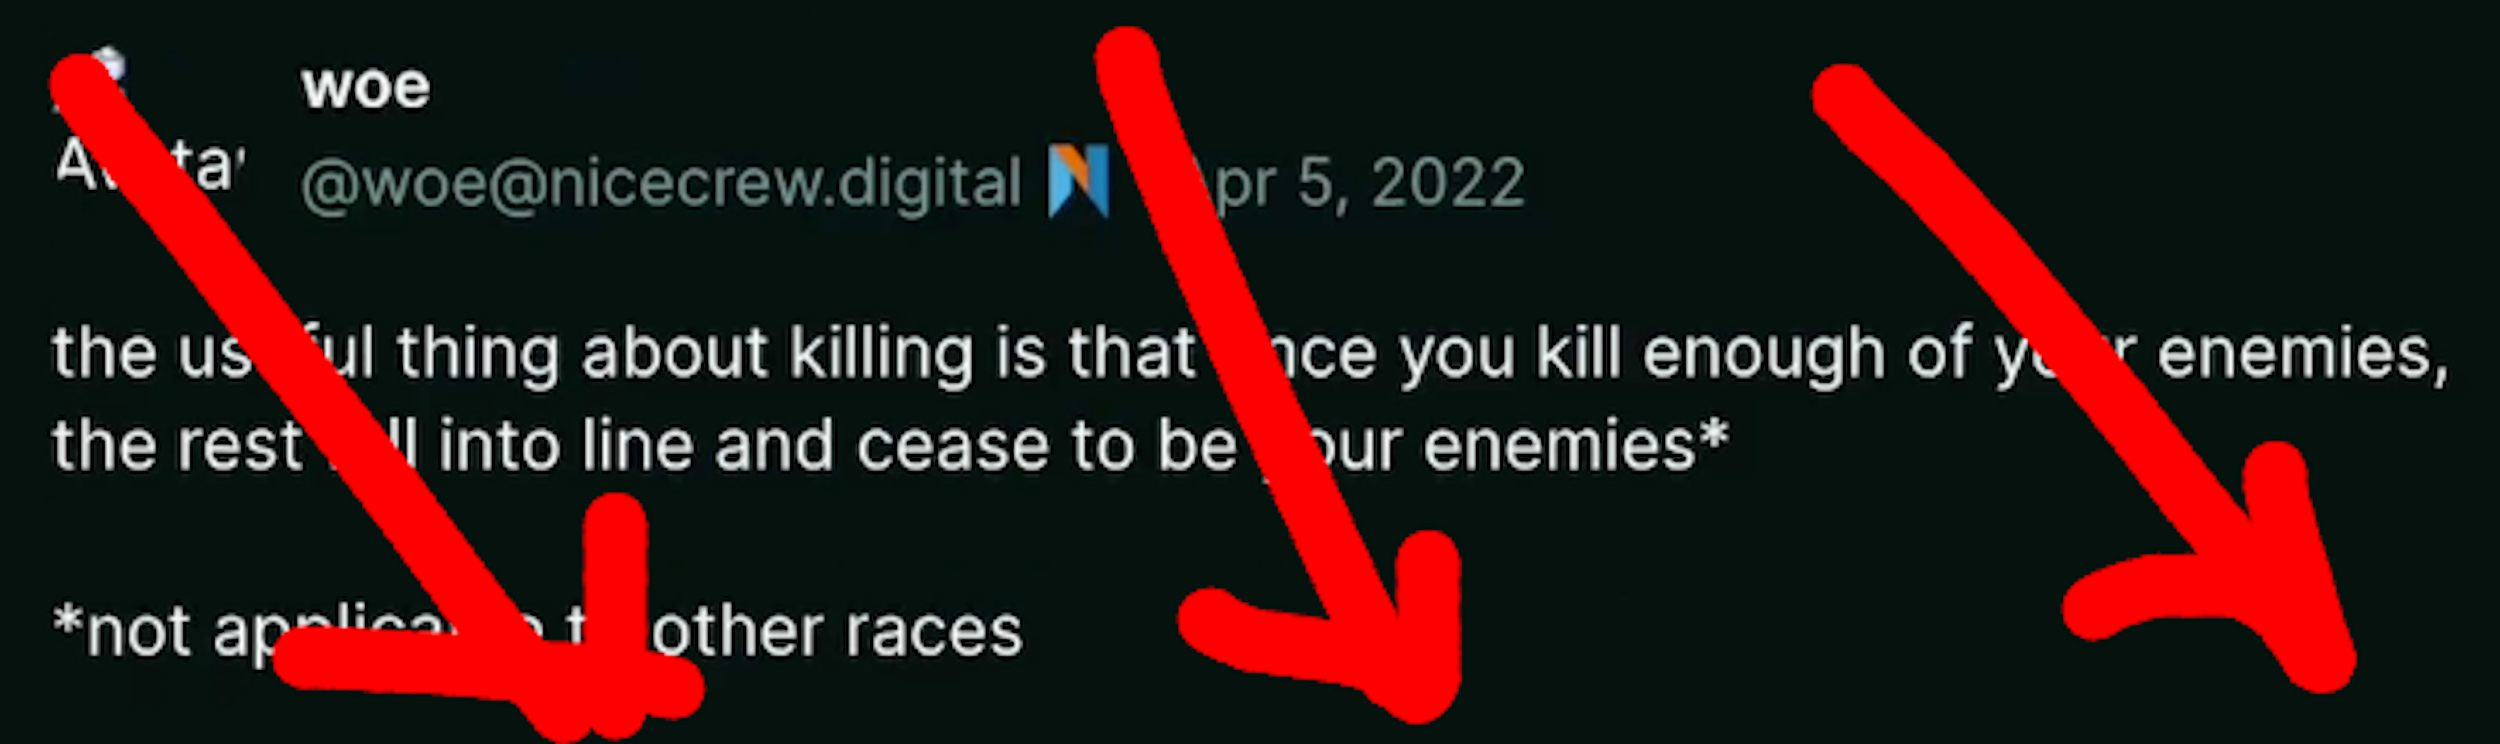 Dumperth on Poast: "the useful thing about killling is that once you kill enough of your enemies, the rest will fall in line and cease to be your enemies* *not applicable to other races"